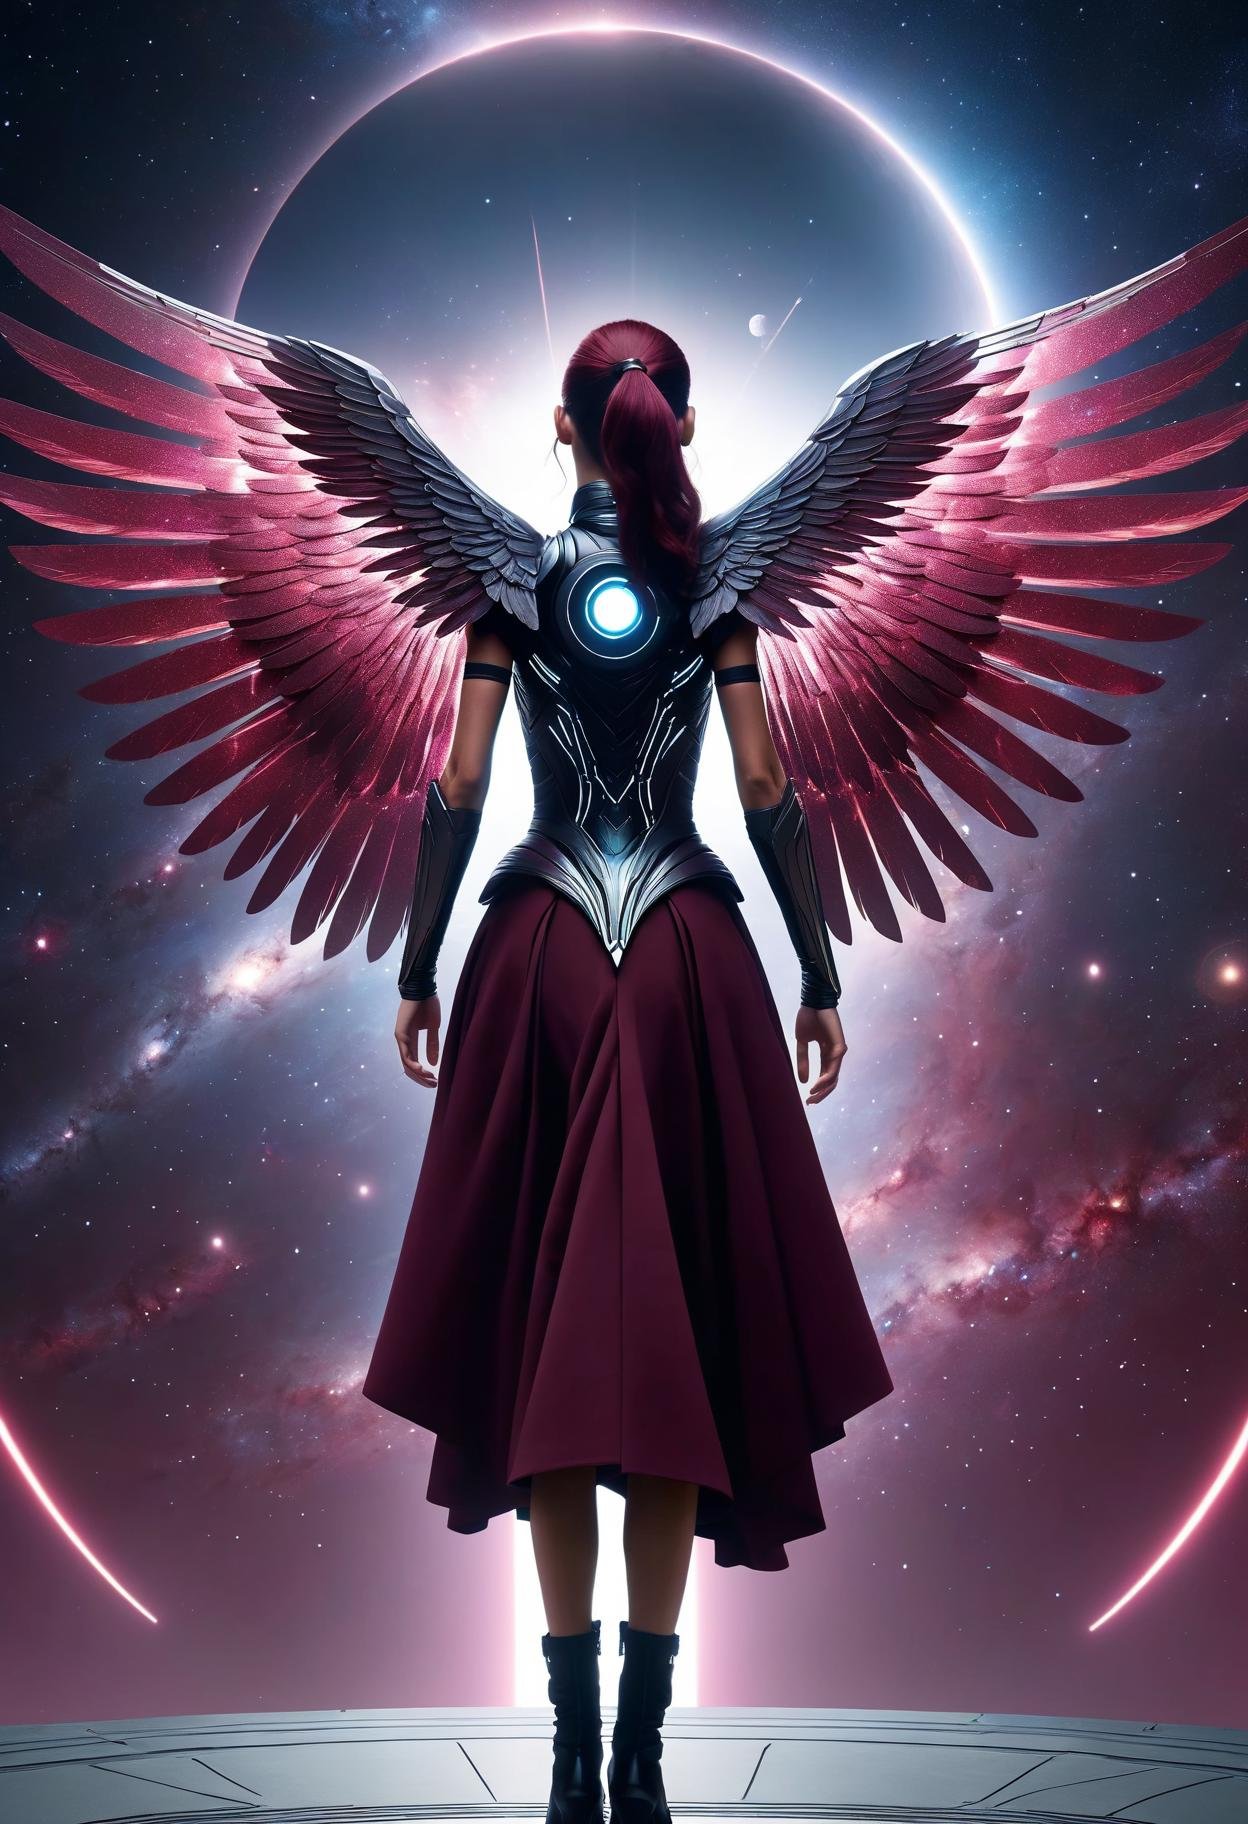 awesome quality, dynamic,DonMDr4g0nXL woman from behind,wings attached to back,skirt, (draconid:0.25) burgundy eclipse chaos, adapt intergalactic teleportation   <lora:myLora\DonMDr4g0nXL-v2rb:1>,